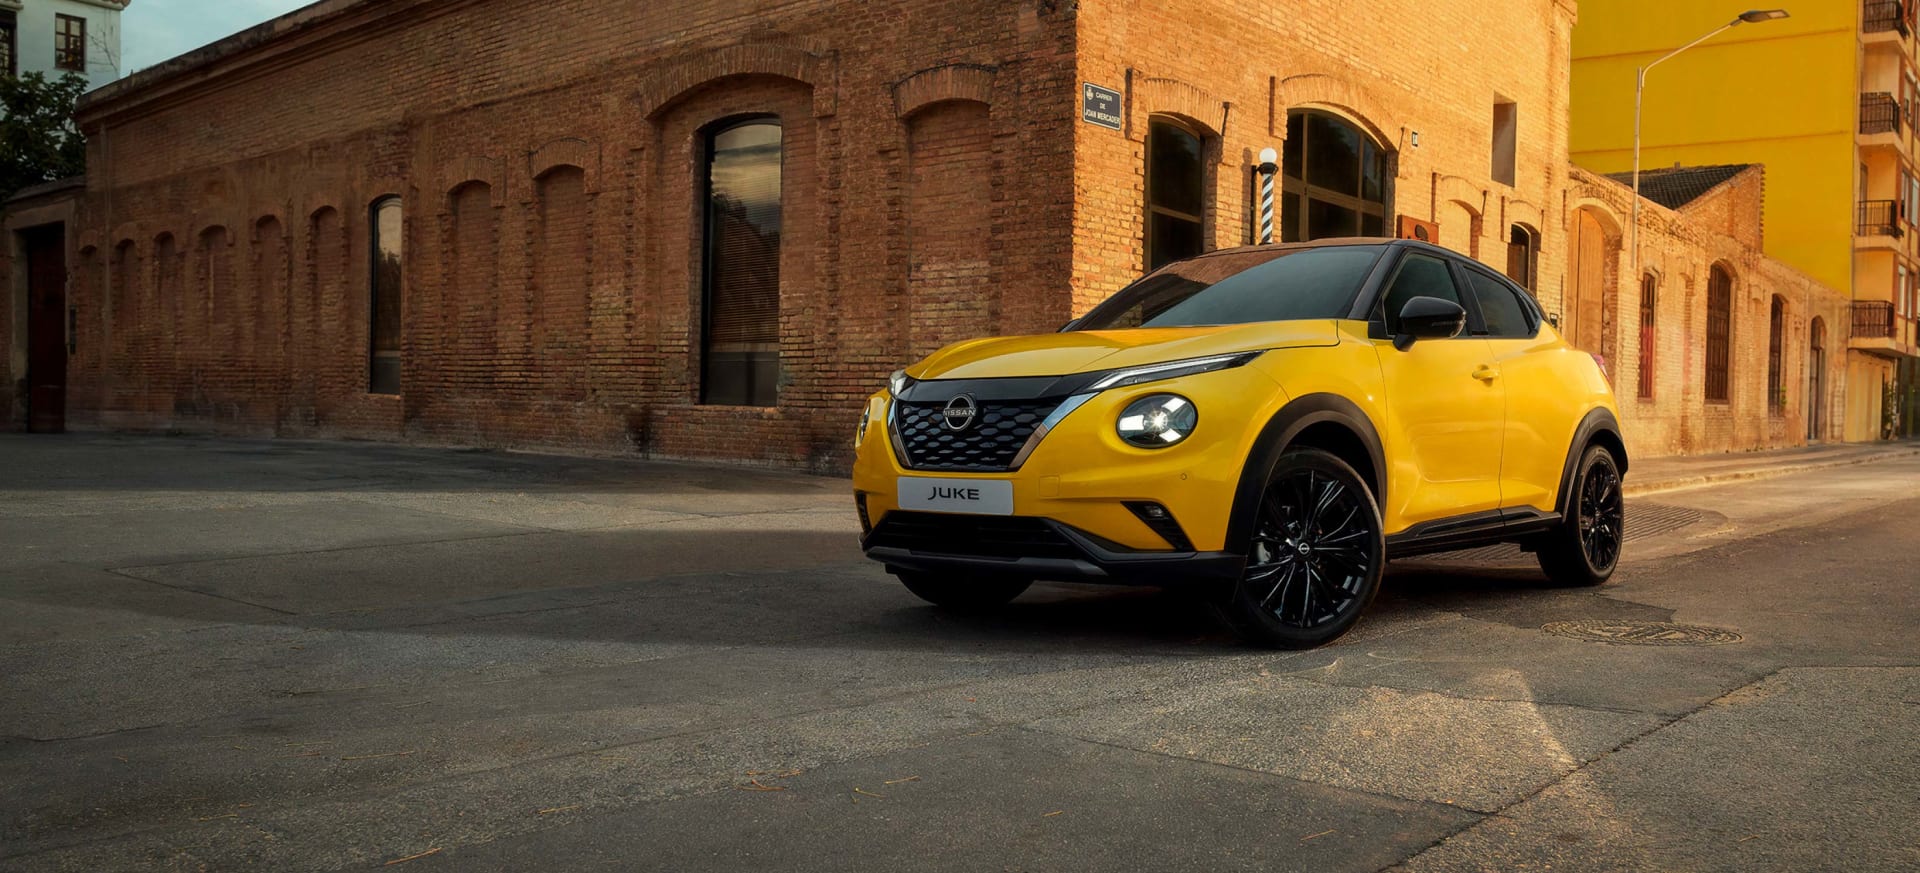 Save up to £2,741 on the New Nissan Juke